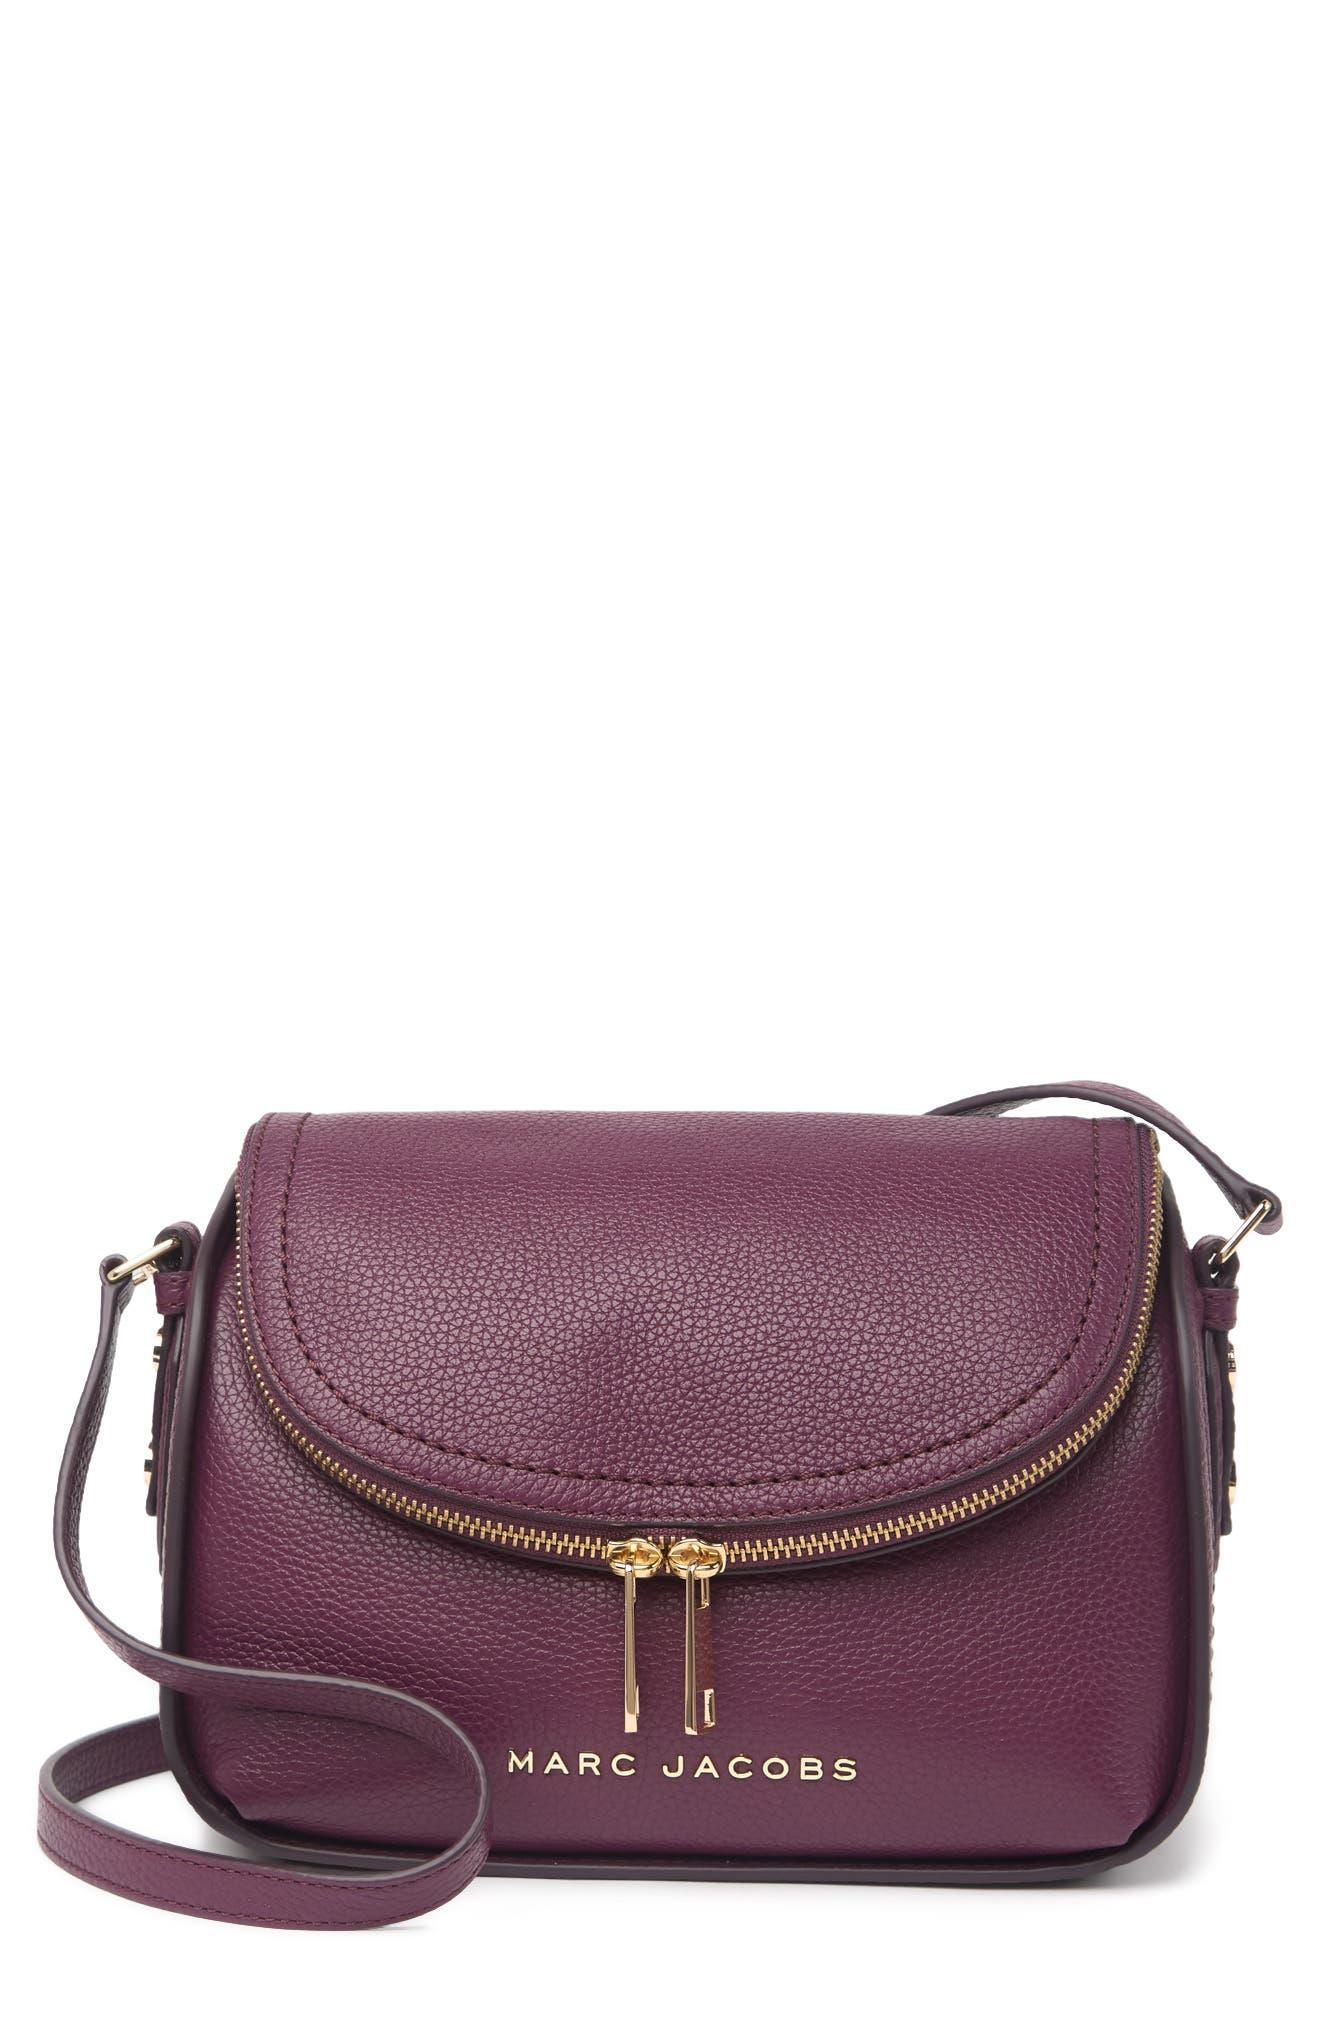 Marc Jacobs The Groove Leather Mini Messenger Bag In Prune At Nordstrom ...